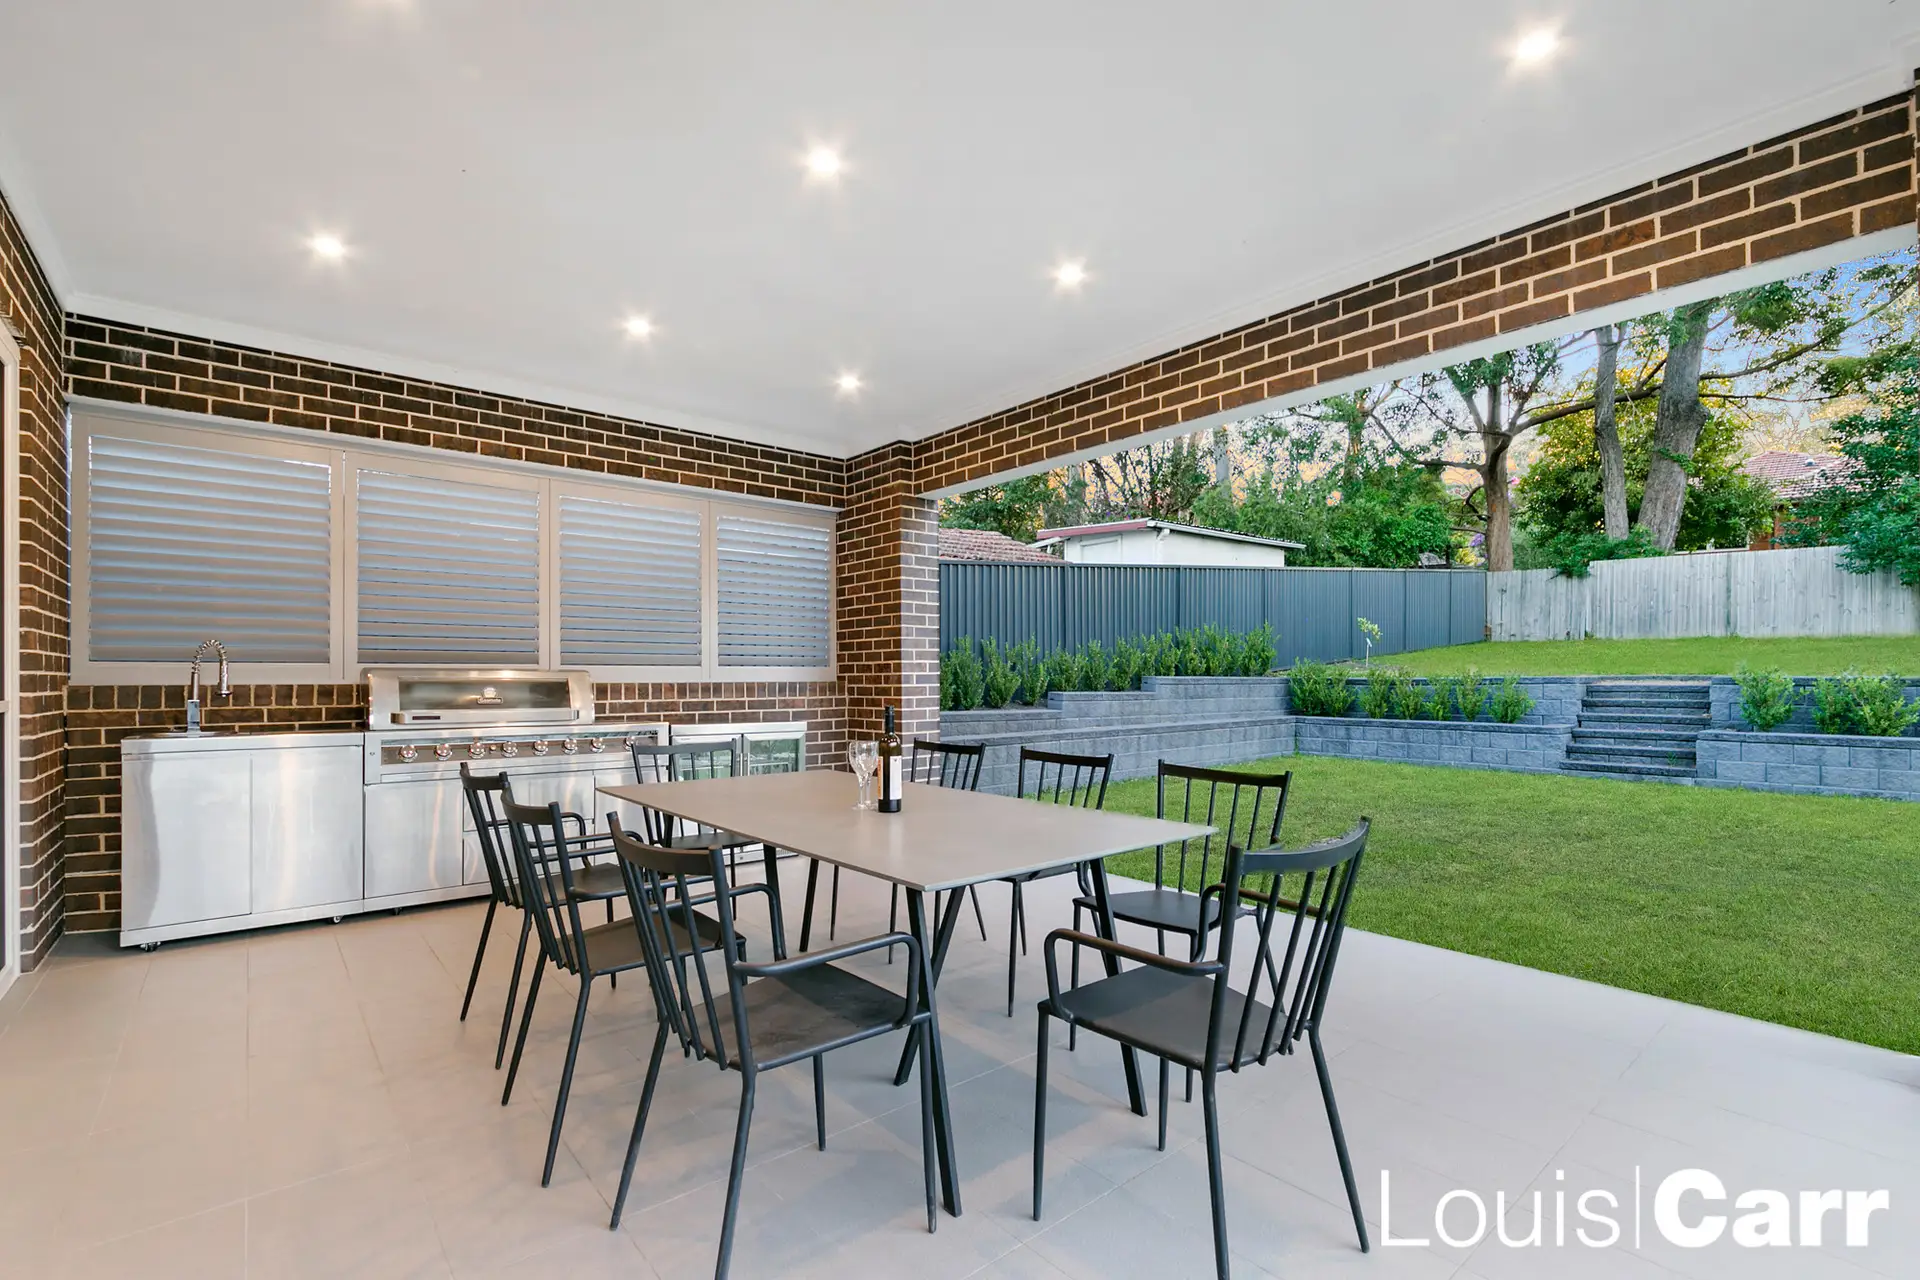 Photo #10: 31 Fairburn Avenue, West Pennant Hills - Sold by Louis Carr Real Estate